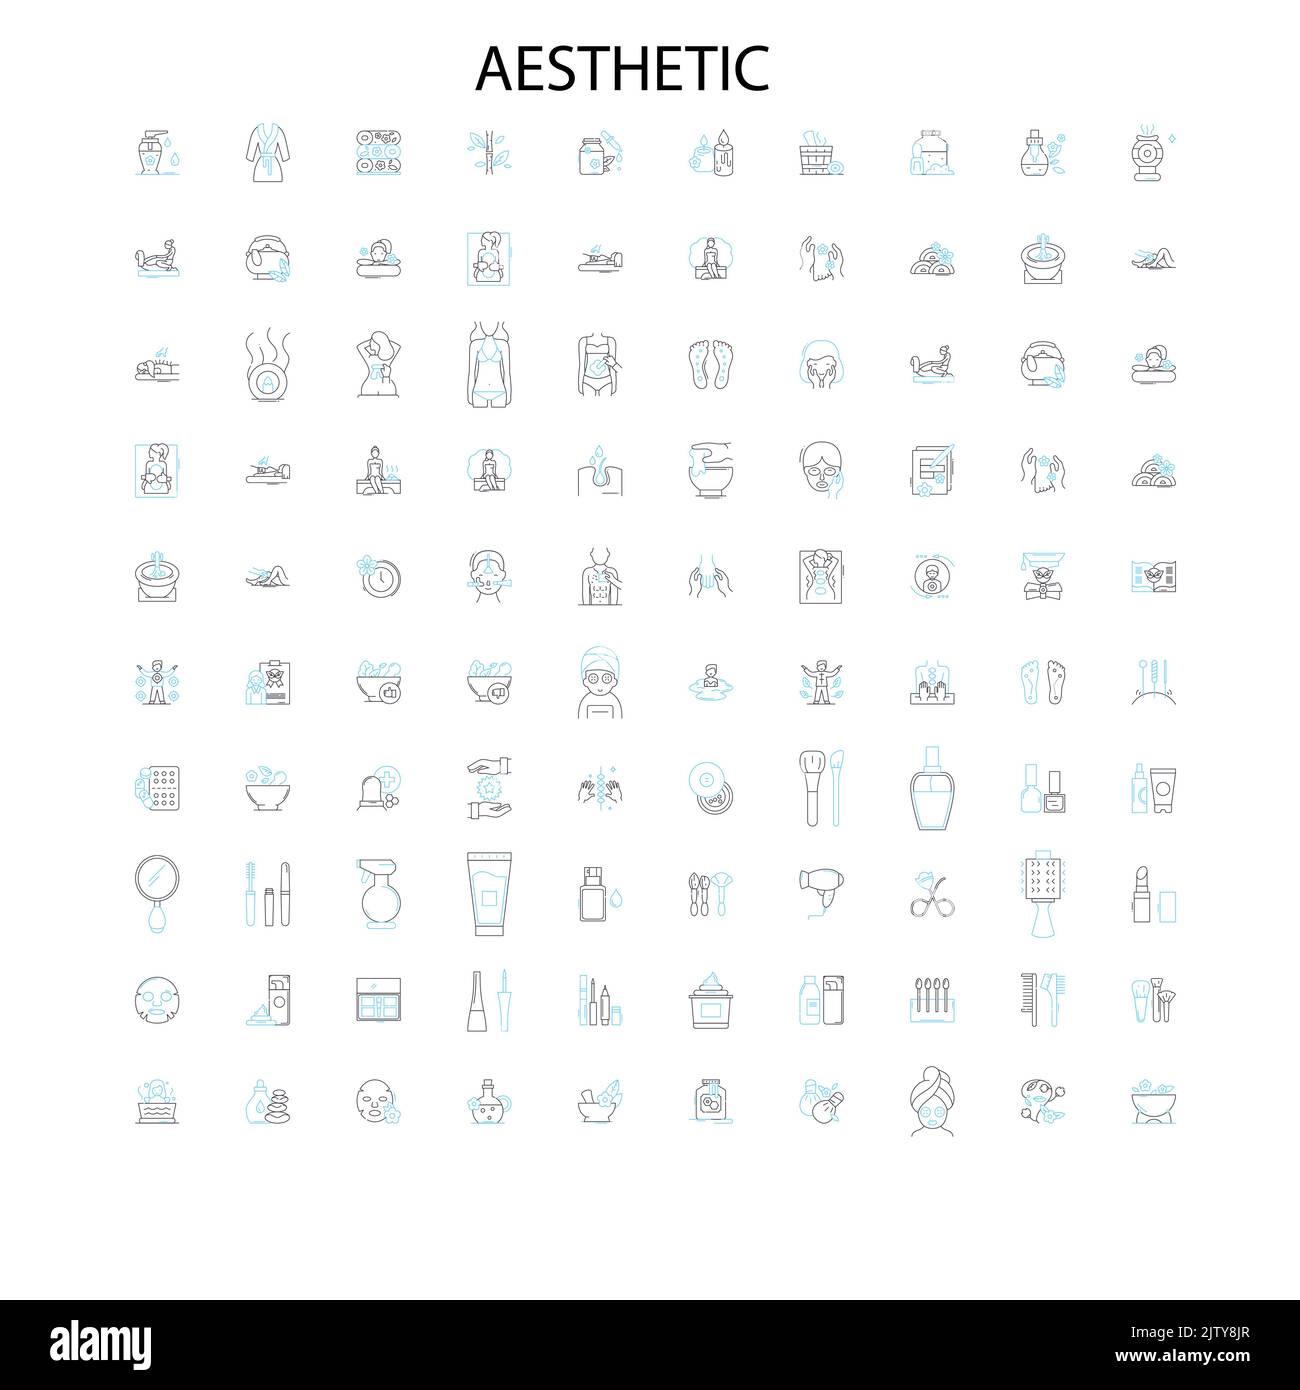 aesthetic icons, signs, outline symbols, concept linear illustration line collection Stock Vector